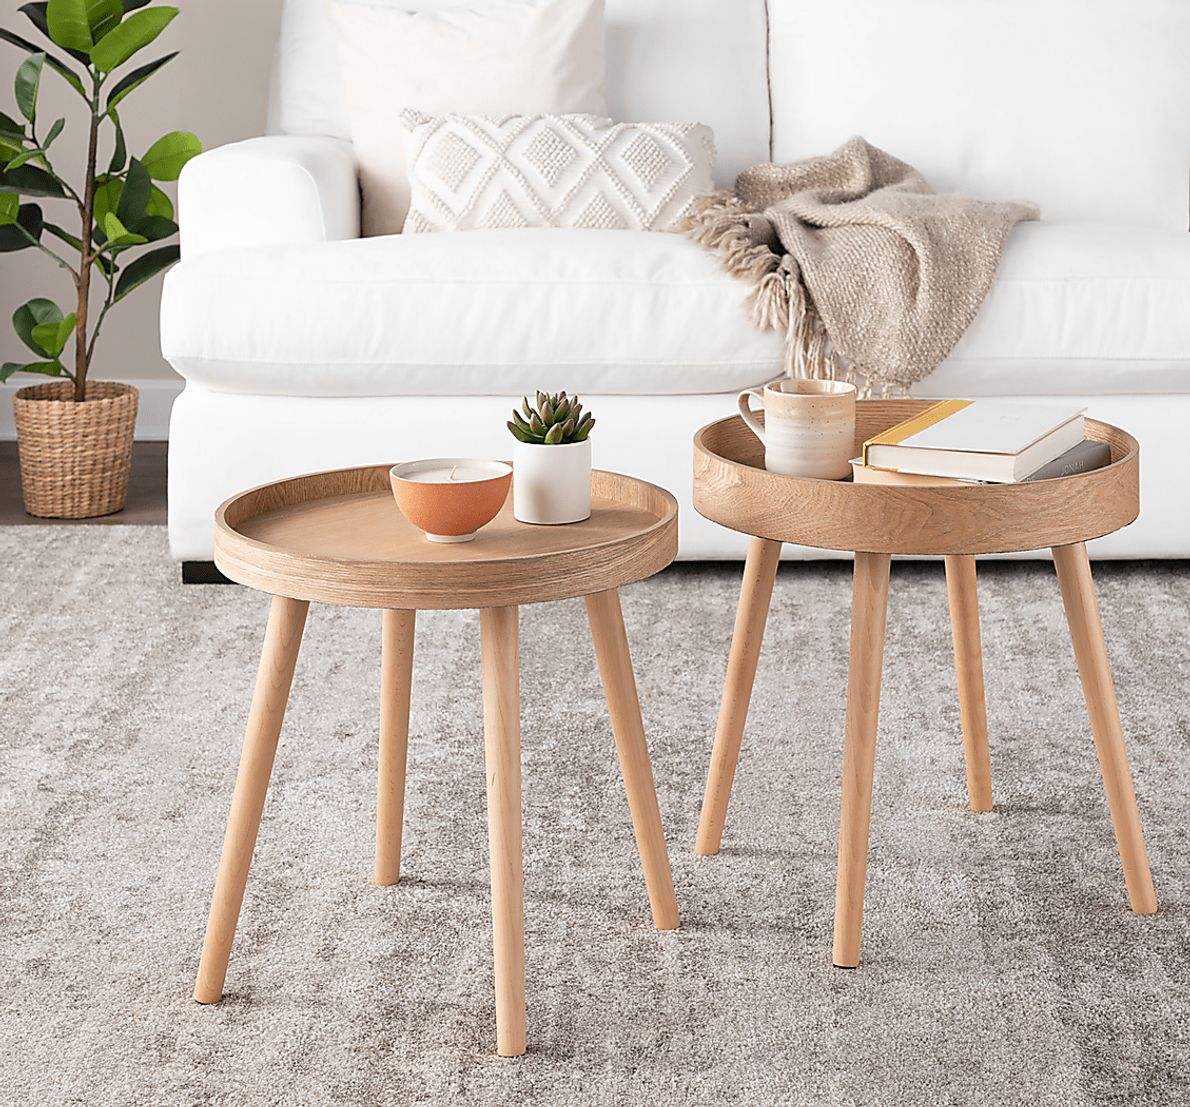 Allegrow Natural End Table, Set of 2